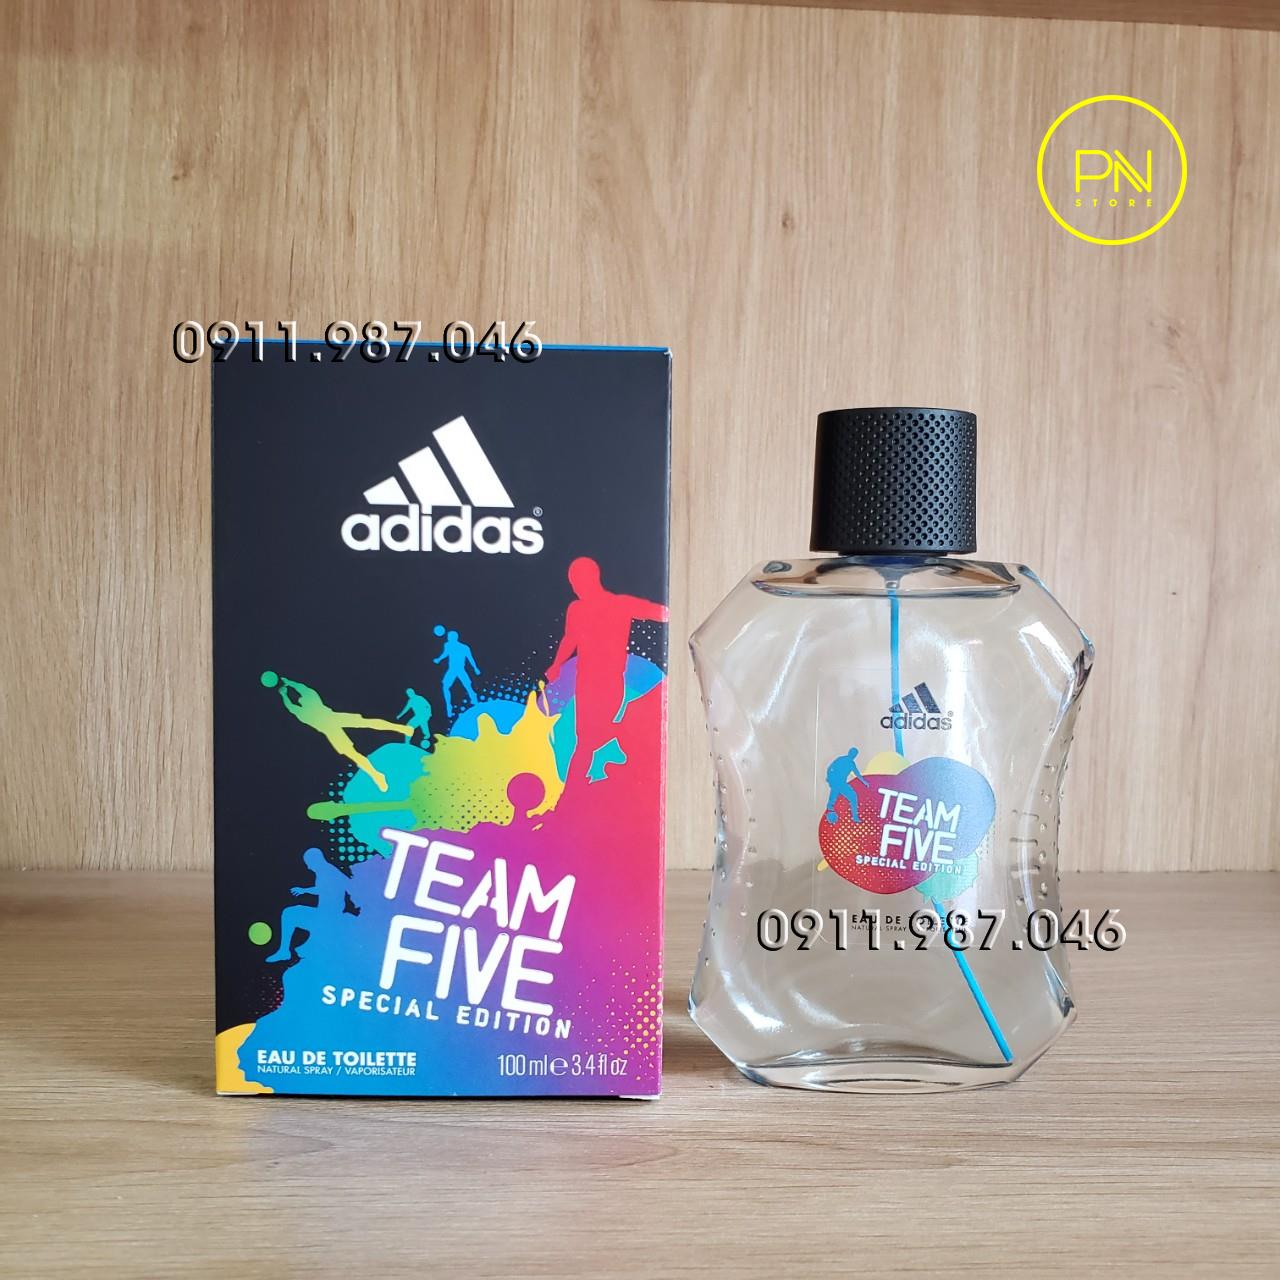 nuoc-hoa-nam-adidas-team-five-special-edition-edt-100ml-chinh-hang-pn102046